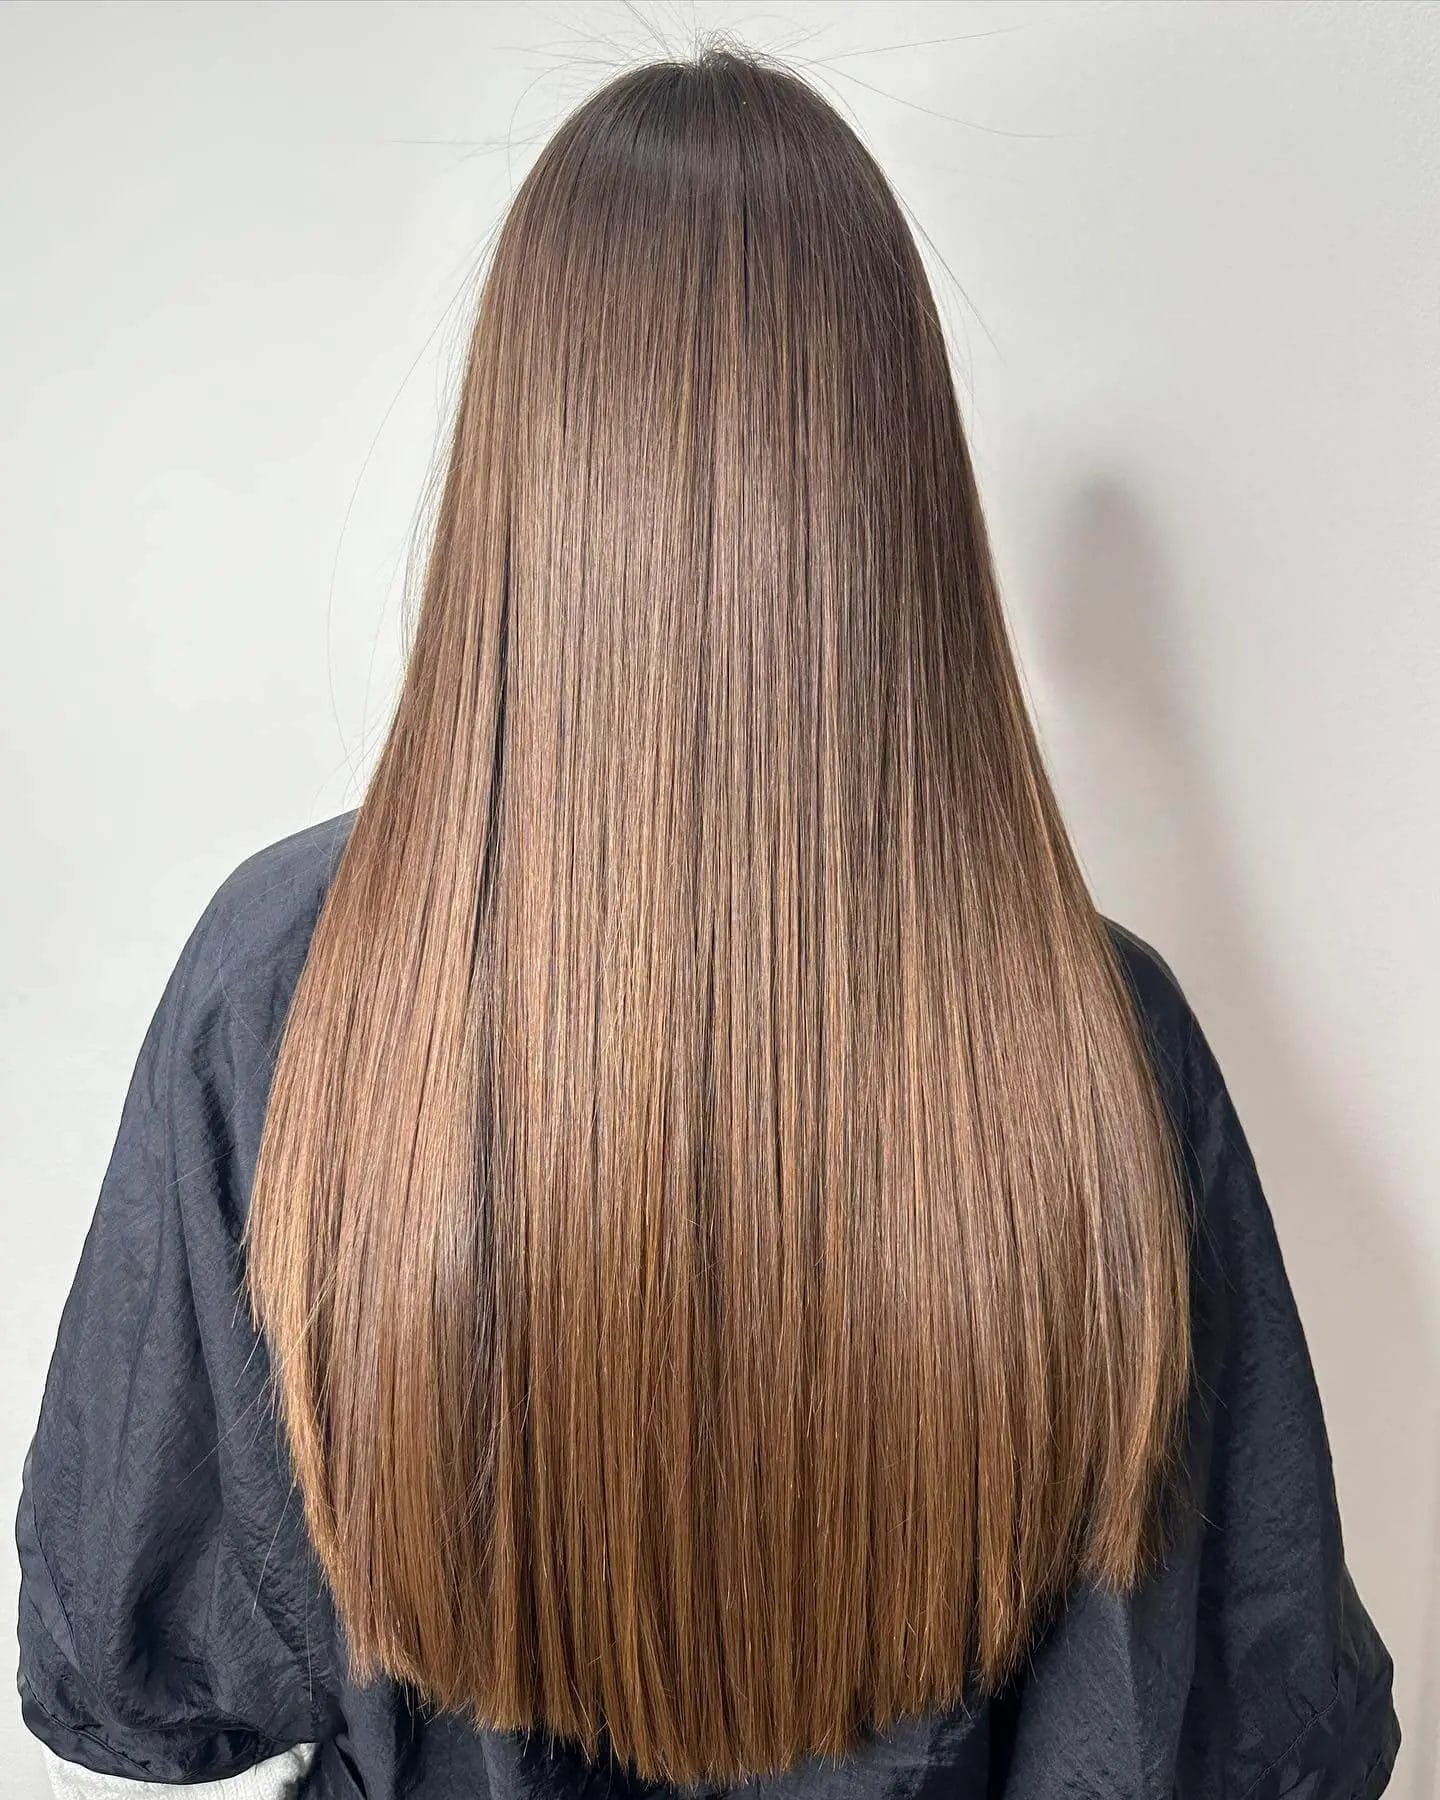 Seamless deep brunette to chestnut U-shaped hair with a gentle flow.
